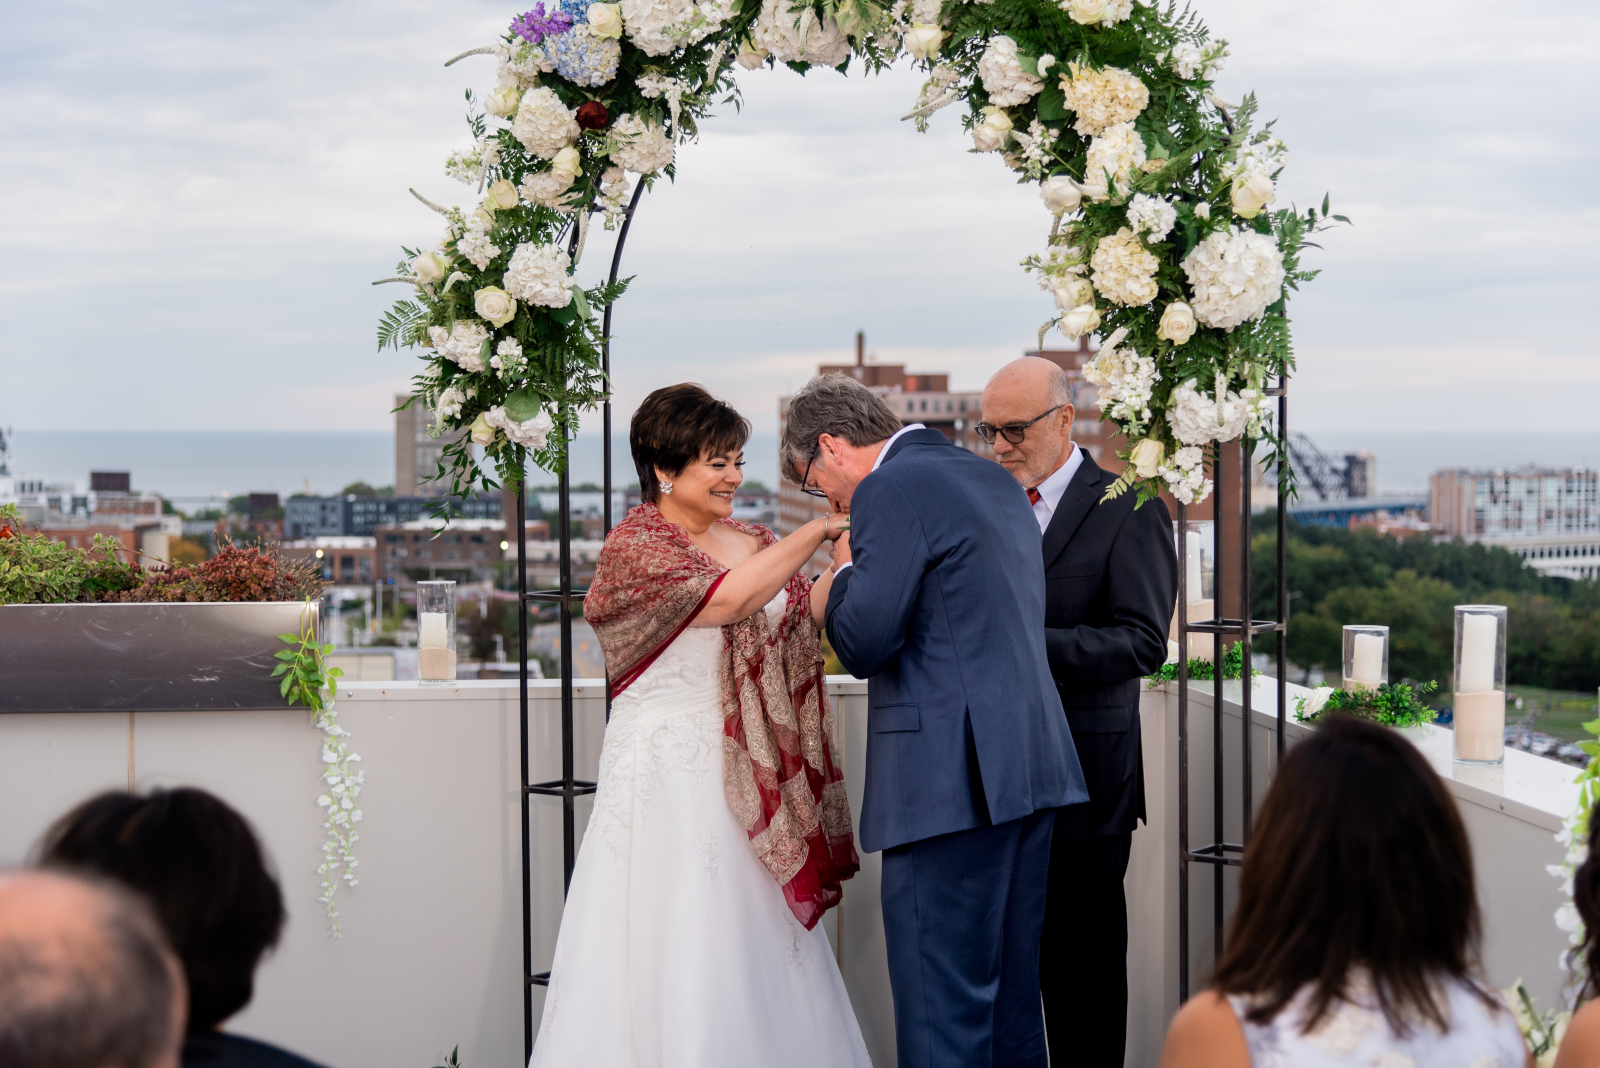 Groom kisses bride's hand, wedding ceremony, sweet, cute wedding photo, older couple, romantic outdoor urban wedding ceremony at Penthouse Events, Ohio City, Cleveland Flats, downtown Cleveland skyline, Lake Erie